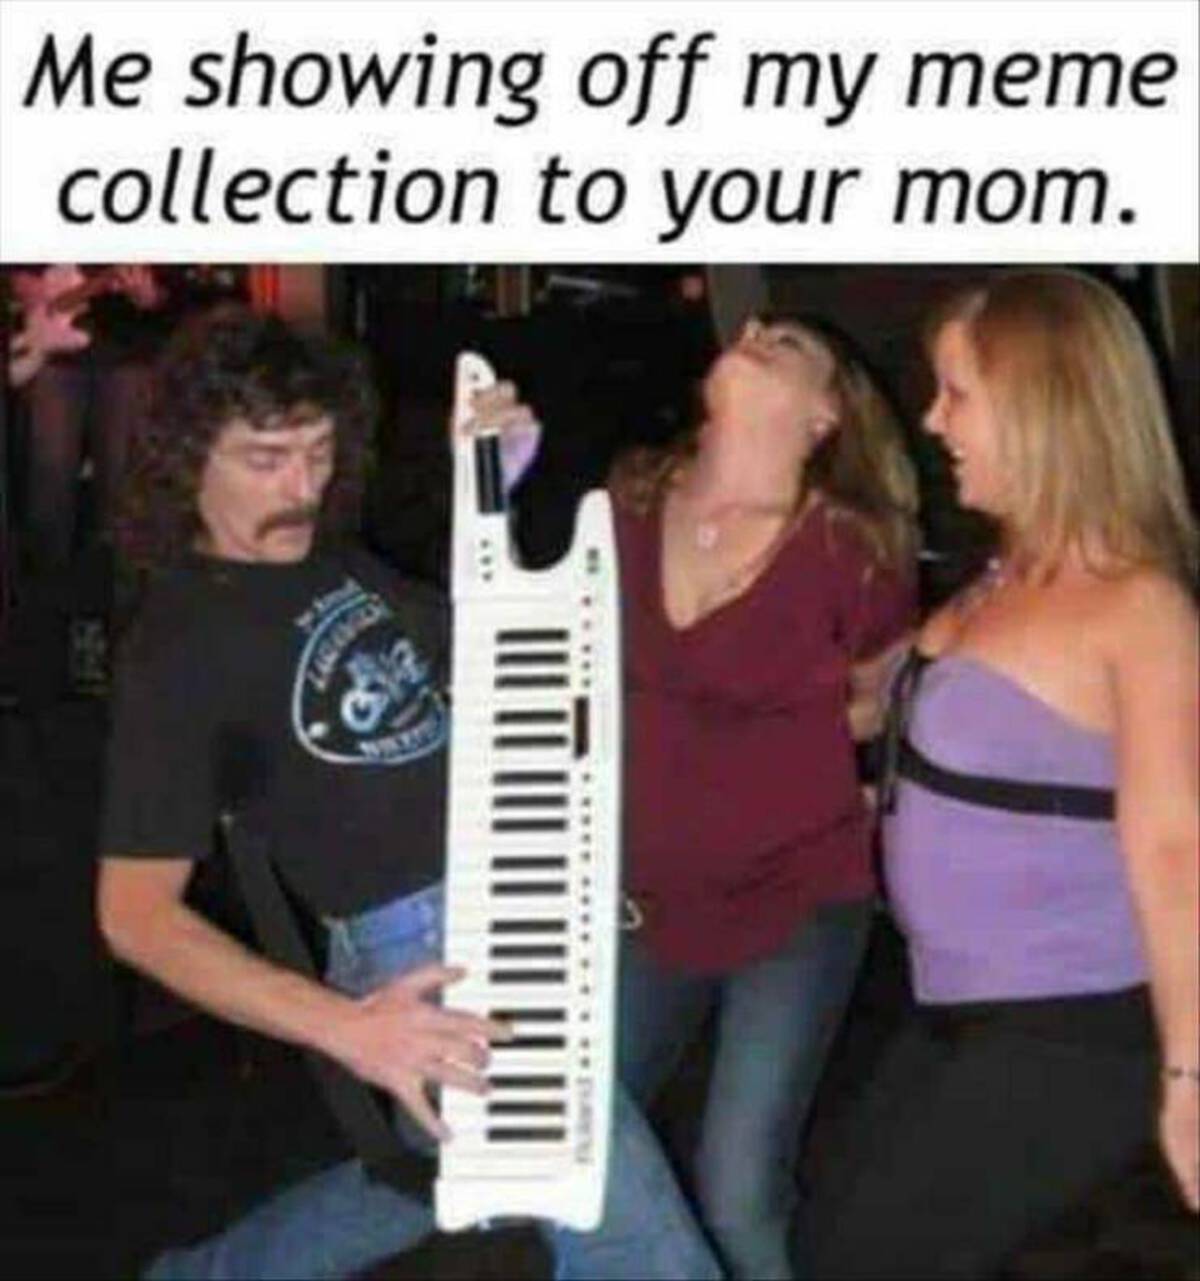 keytar - Me showing off my meme collection to your mom.